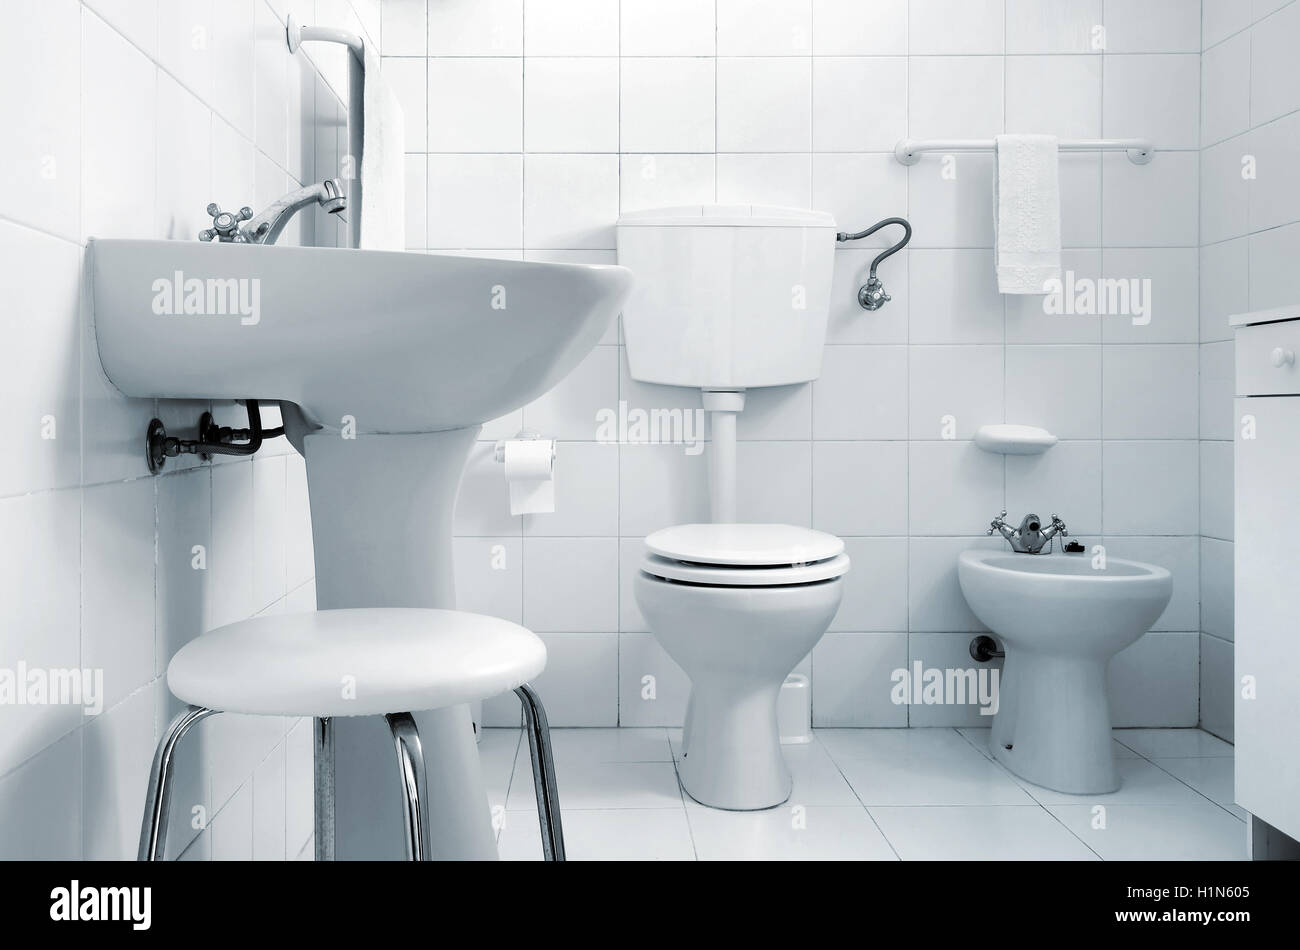 Black And White Image Of A Restroom With Toilet Bidet Sink